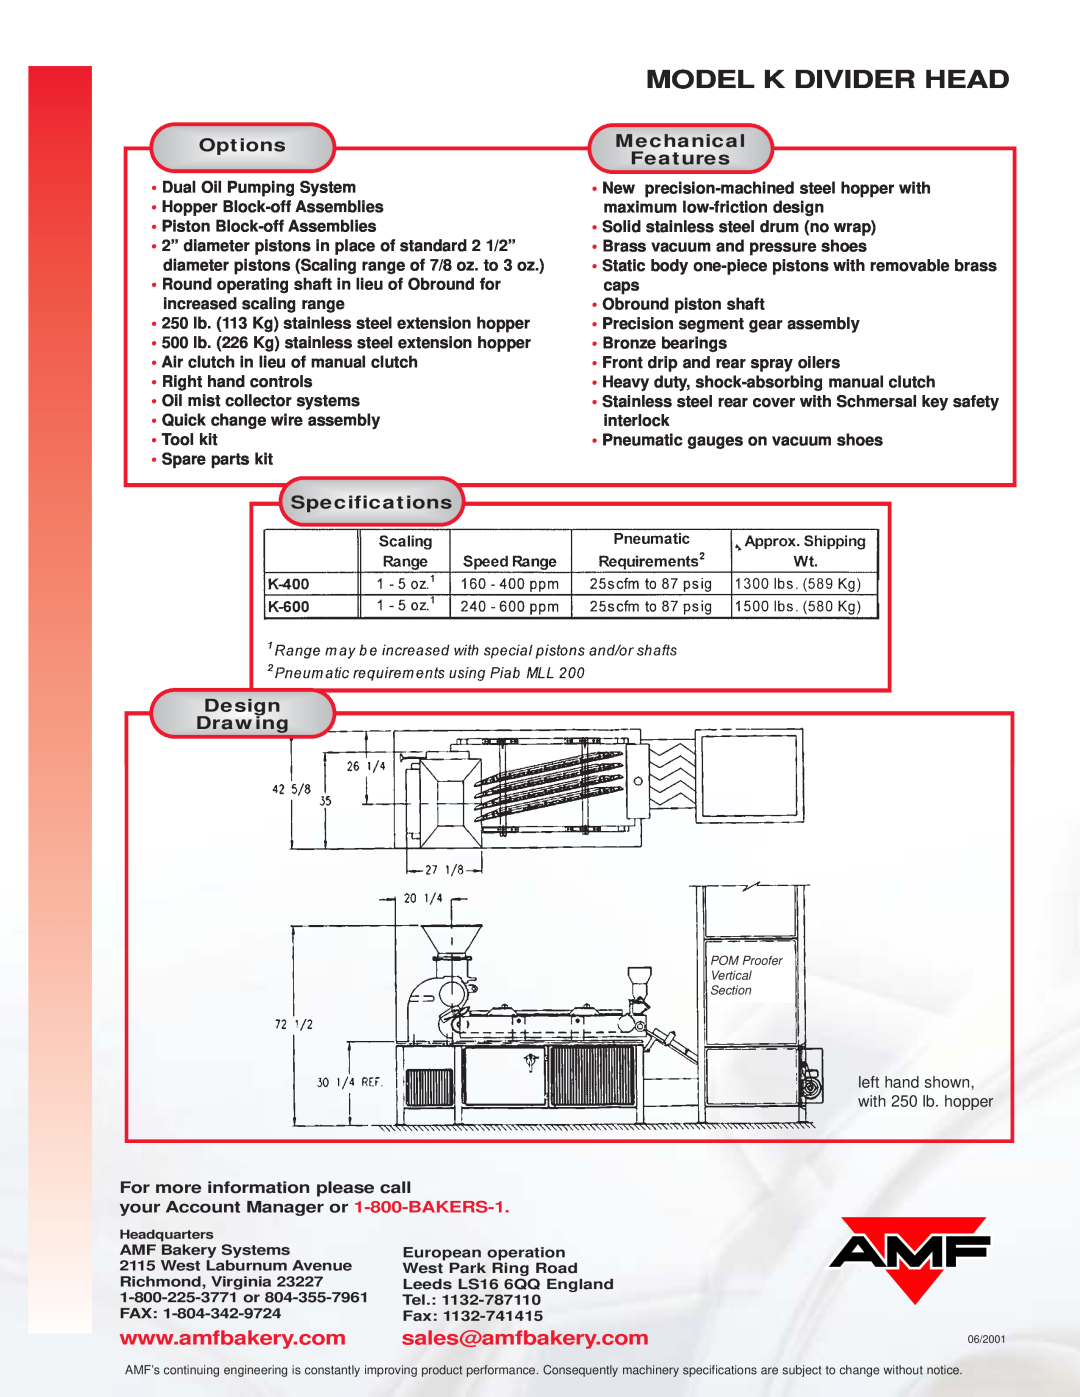 AMF manual Options, Mechanical, Features, Specifications, Design, Drawing, Model K Divider Head 